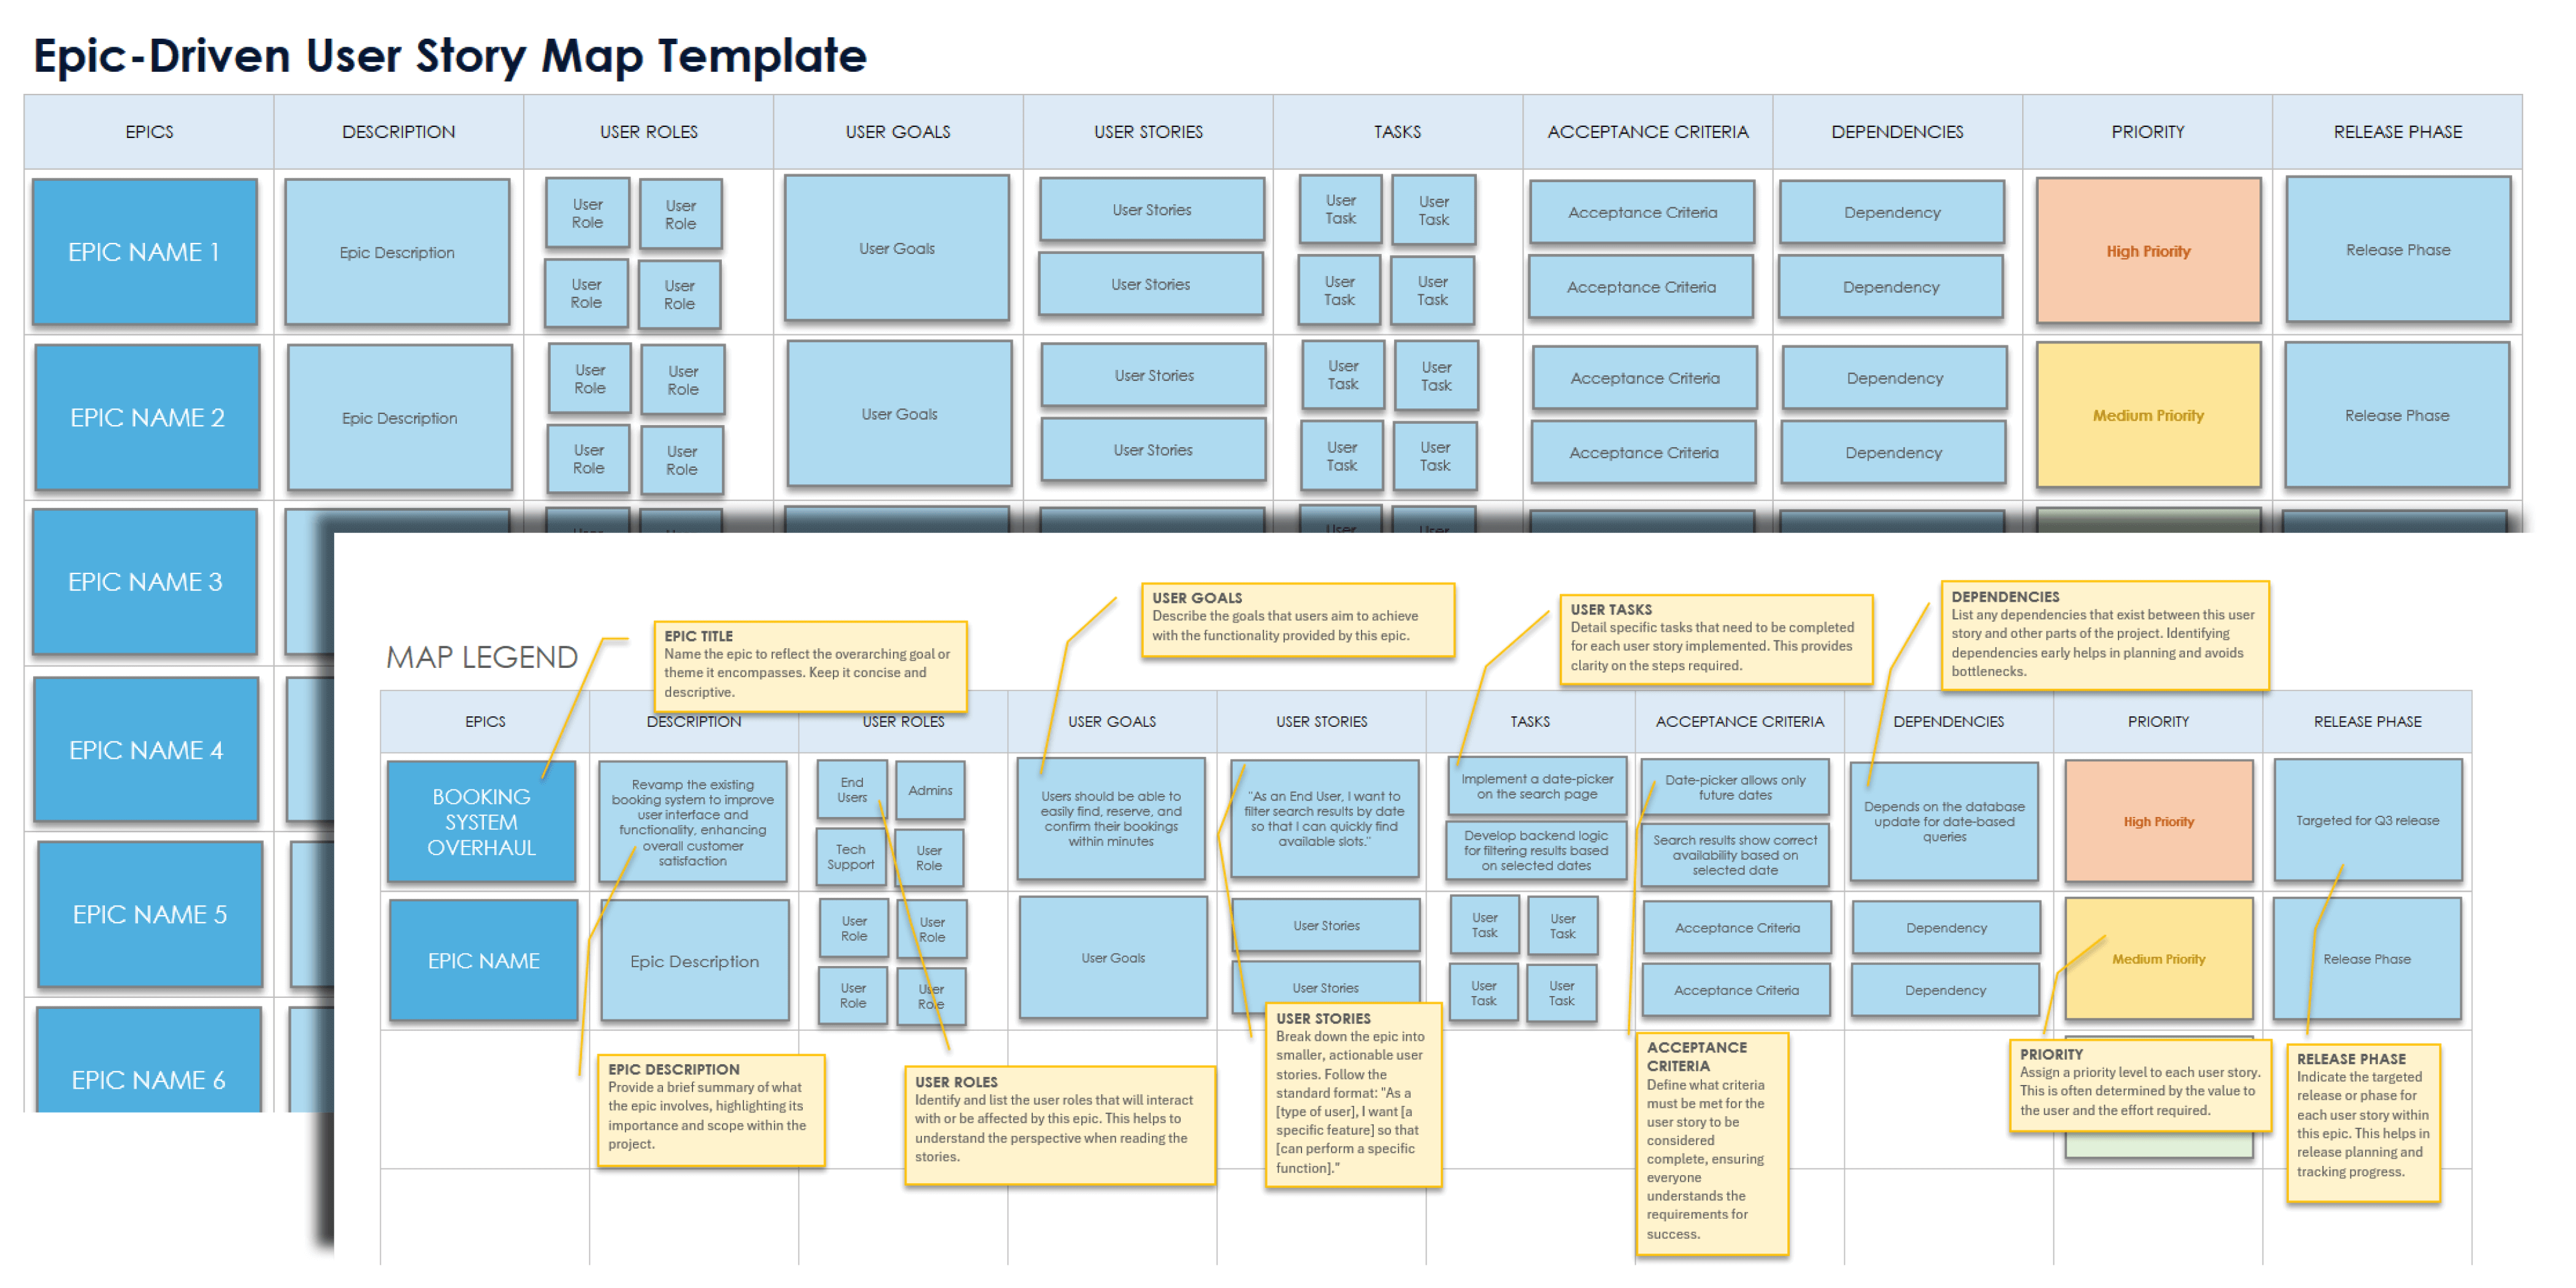 Epic Driven User Story Map Template